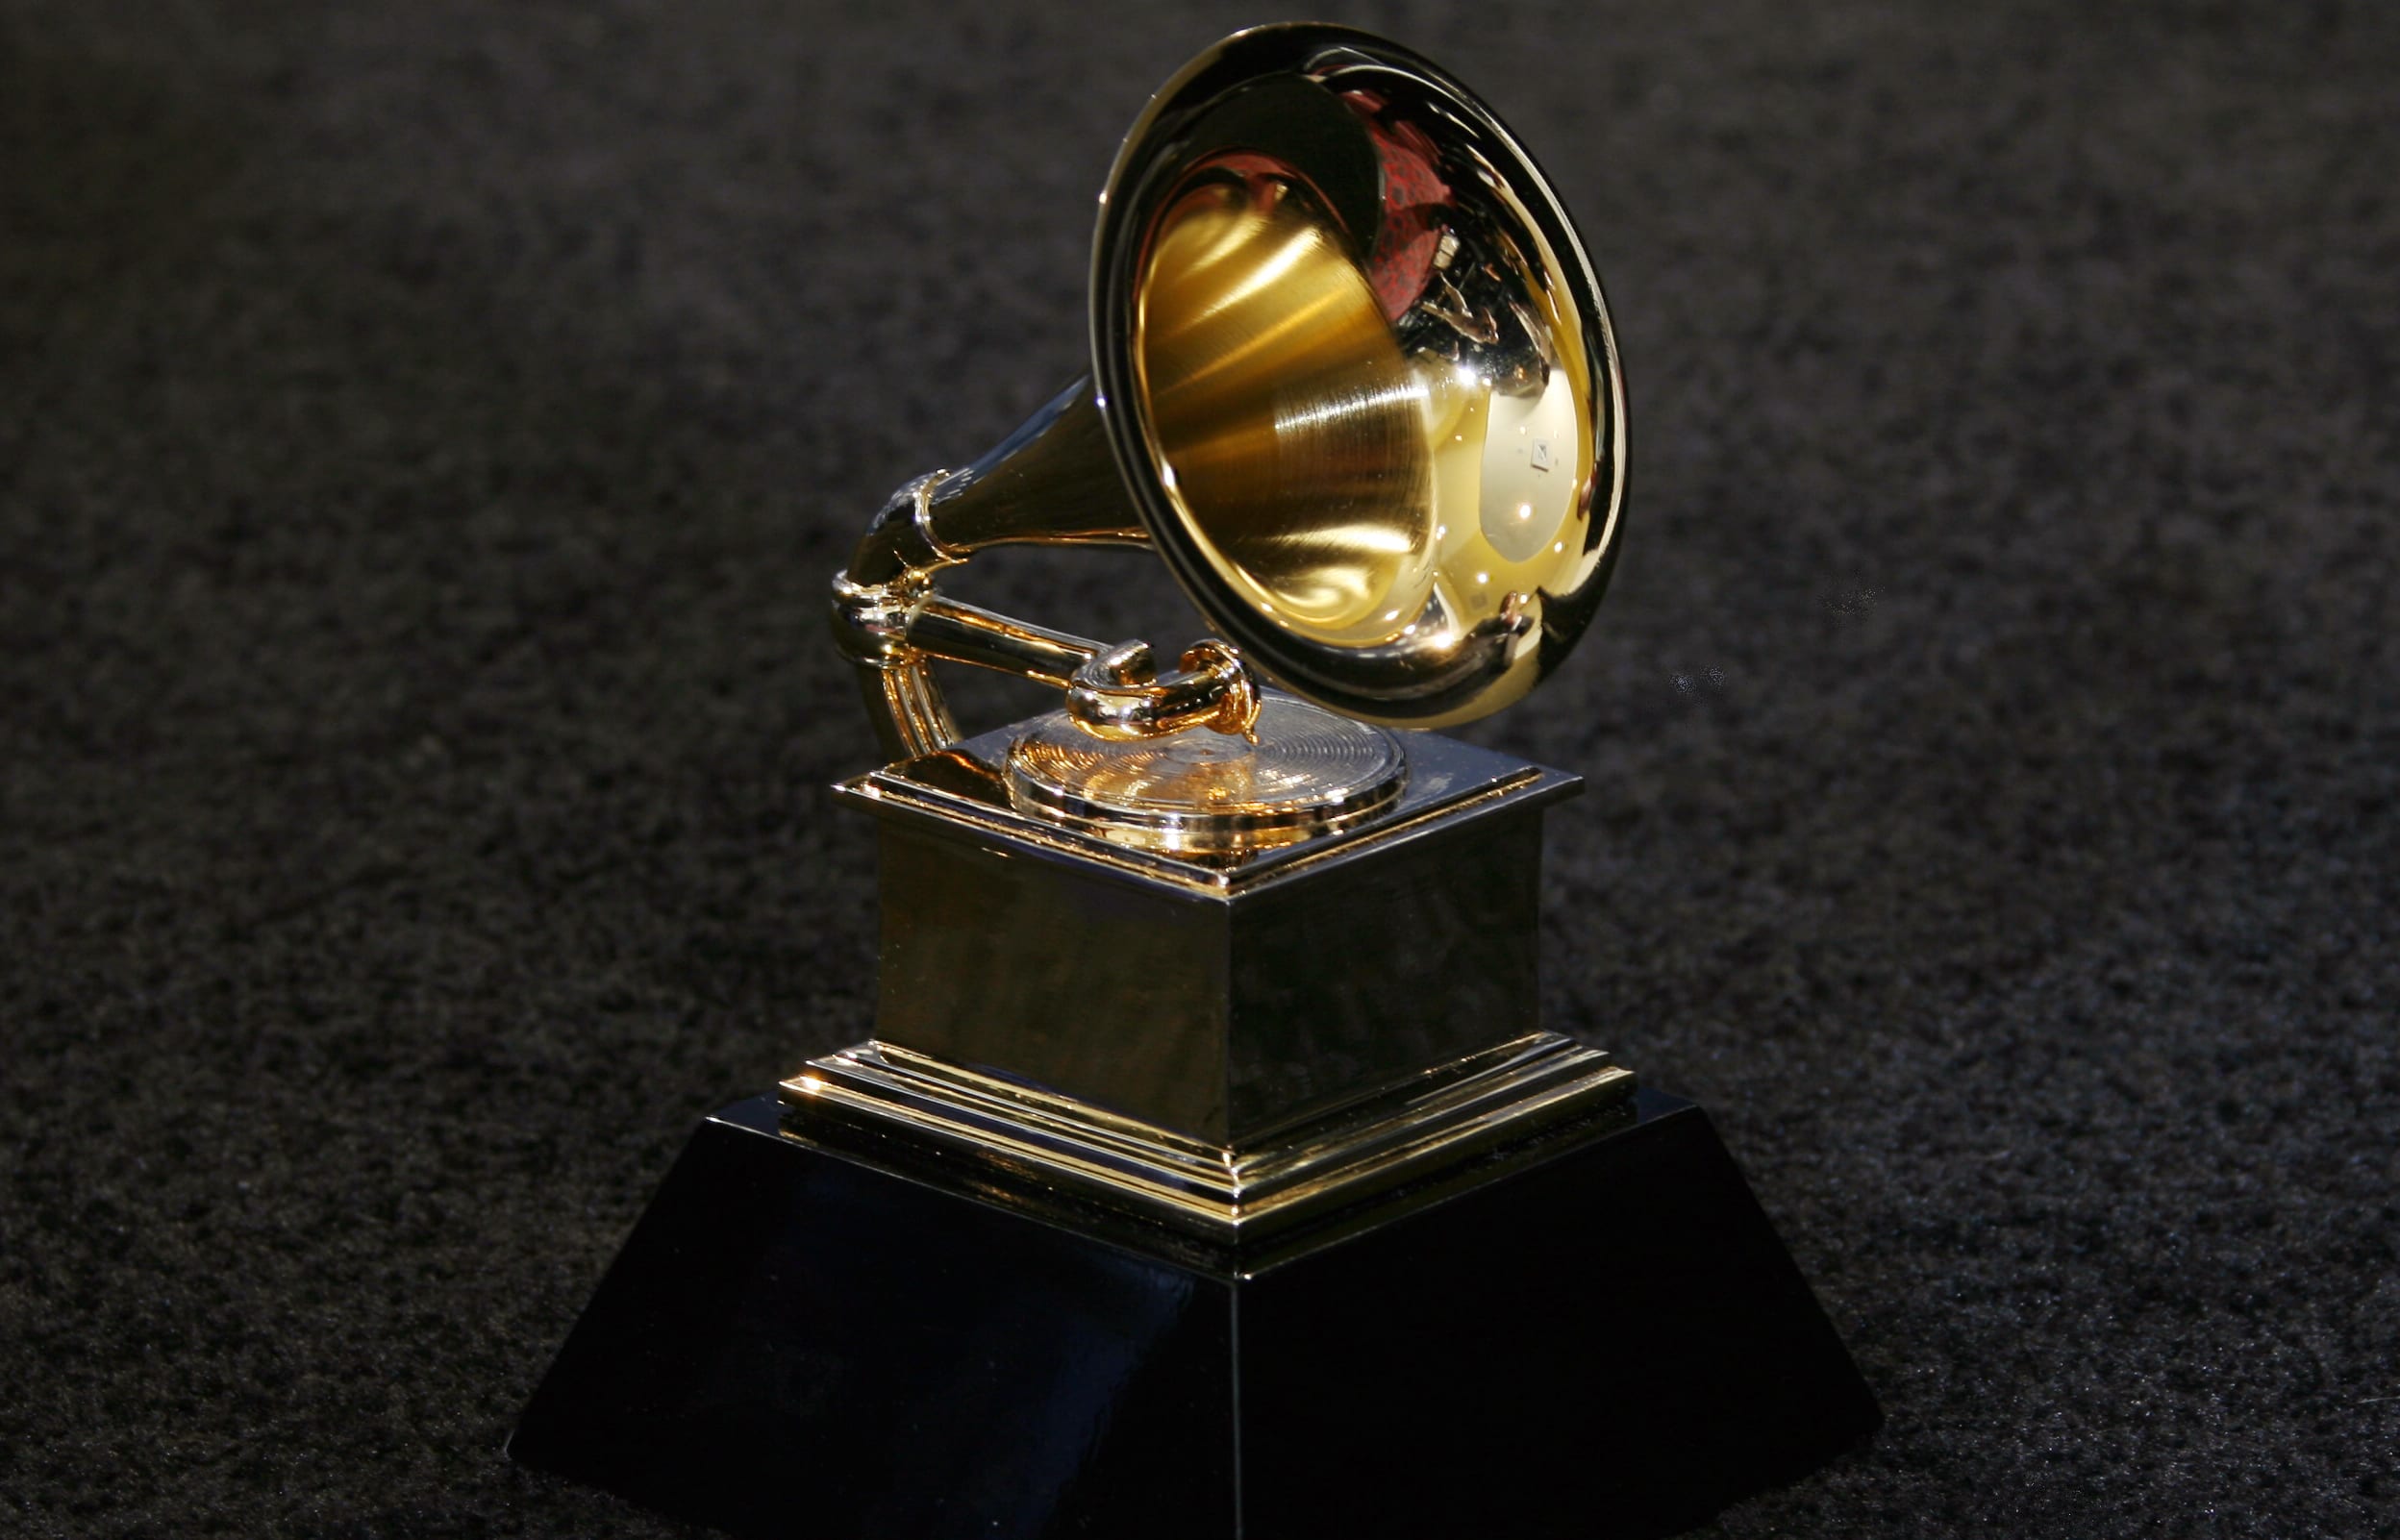 The trophy of the Grammy Awards in Los Angeles in 2007.